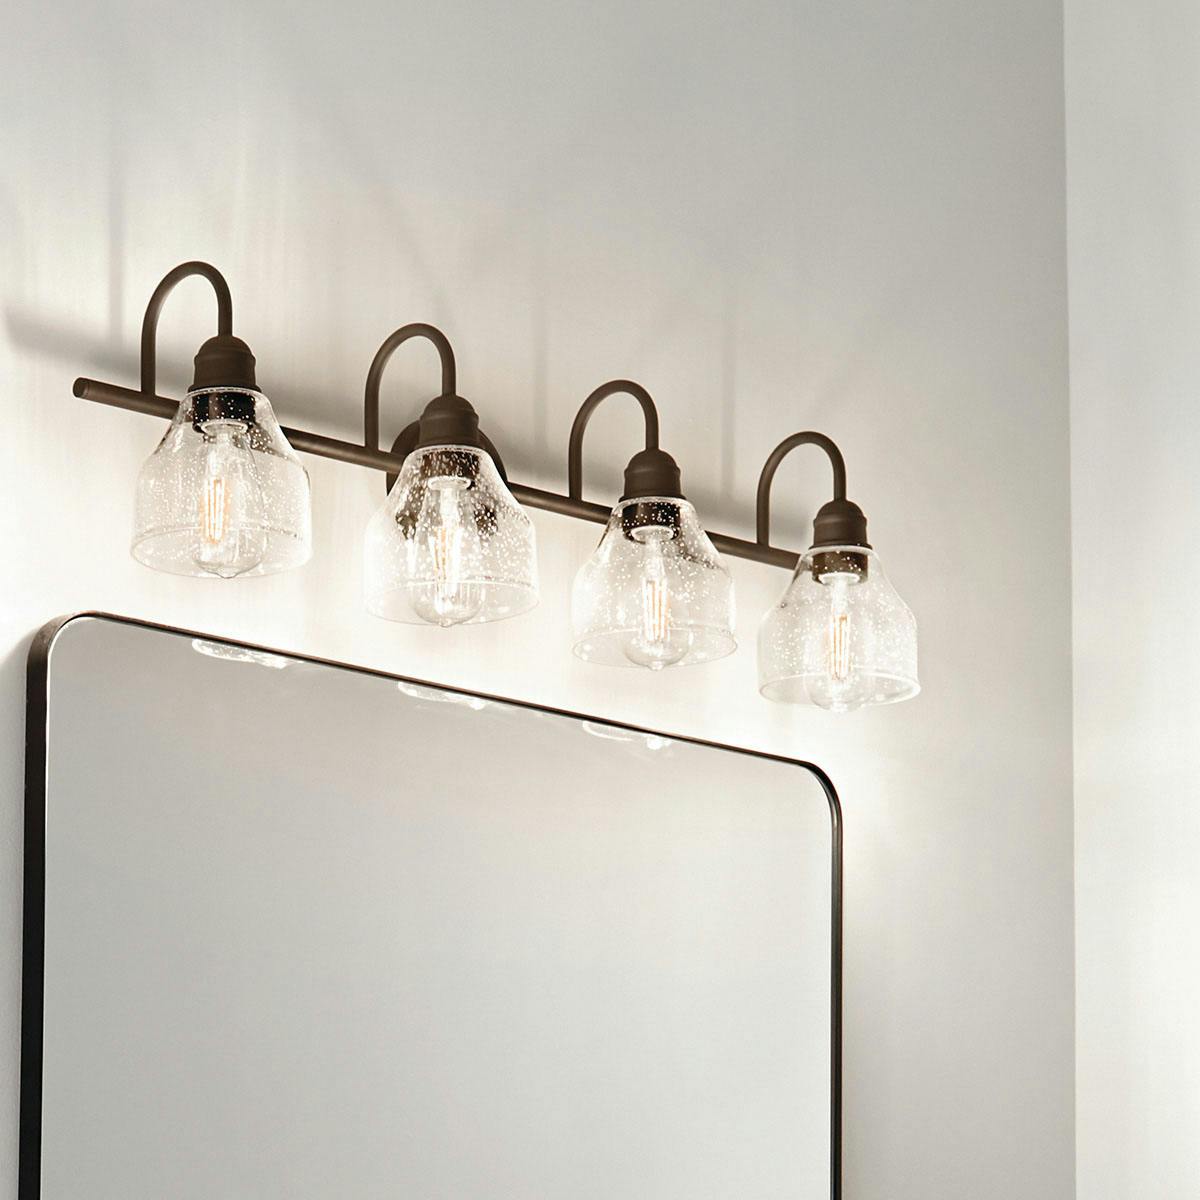 Day time Bathroom featuring Avery vanity light 45974OZ